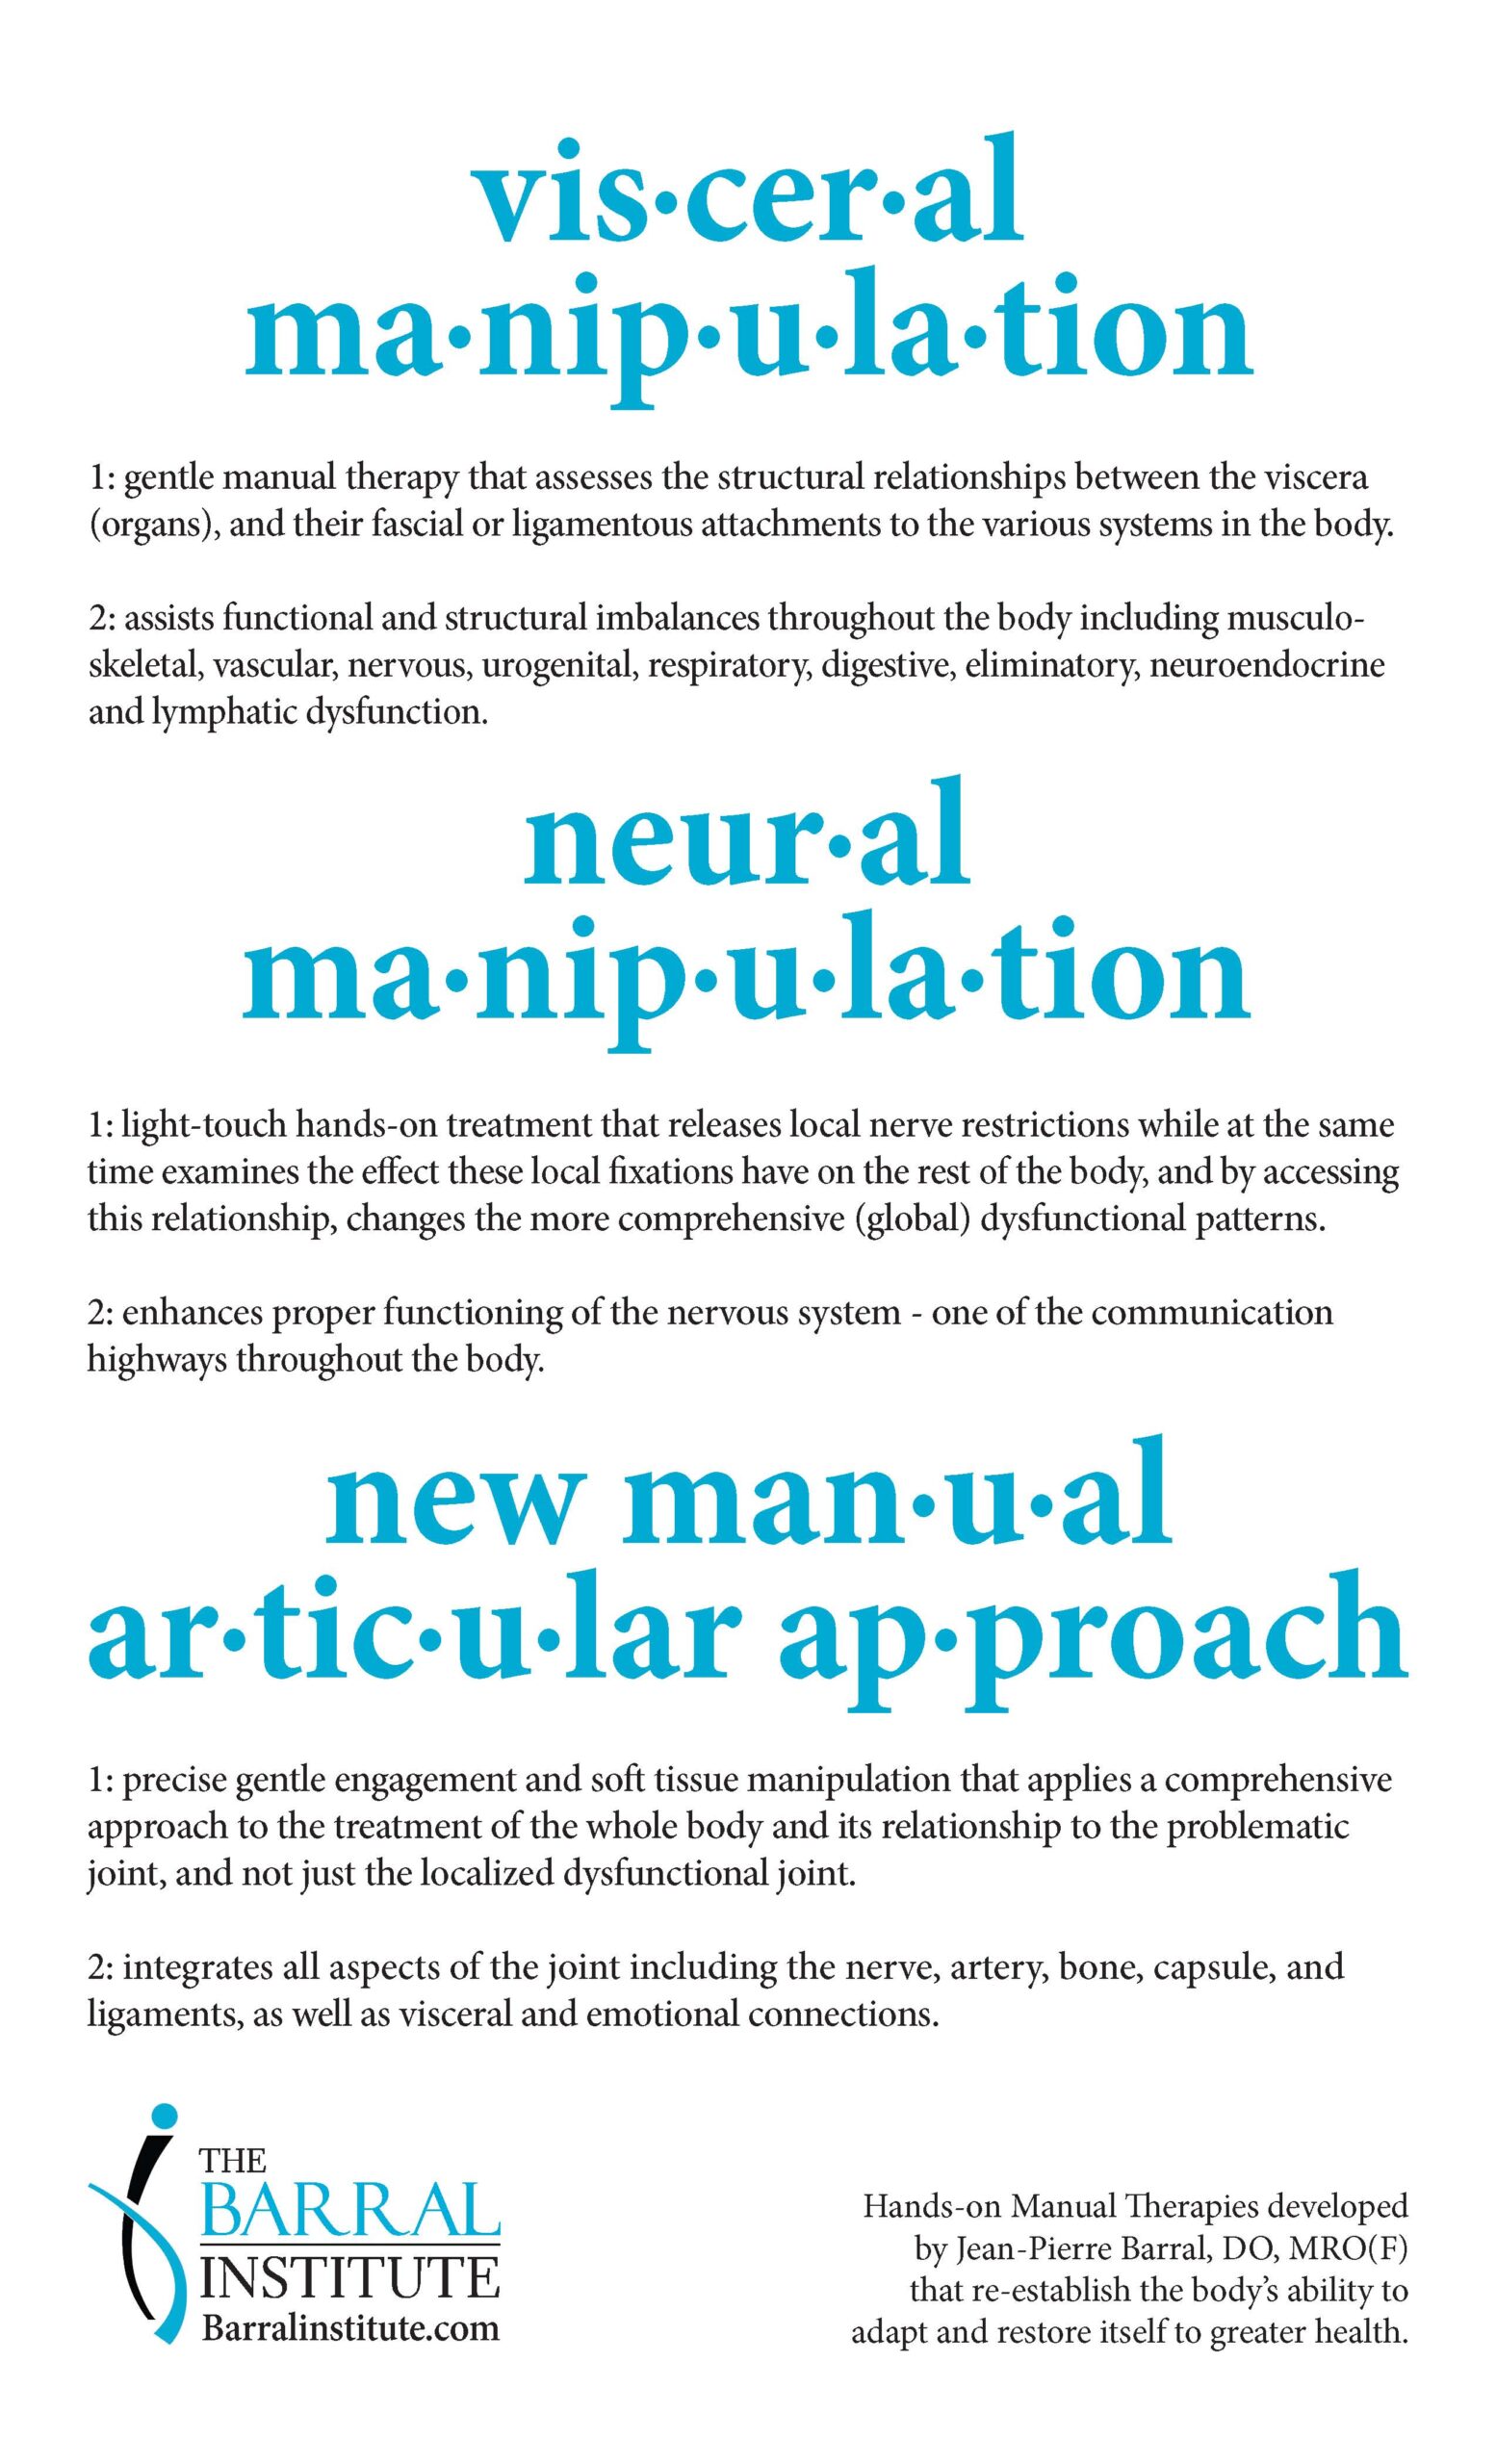 Definitions for visceral manipulation, neural manipulation, and new manual articular approach